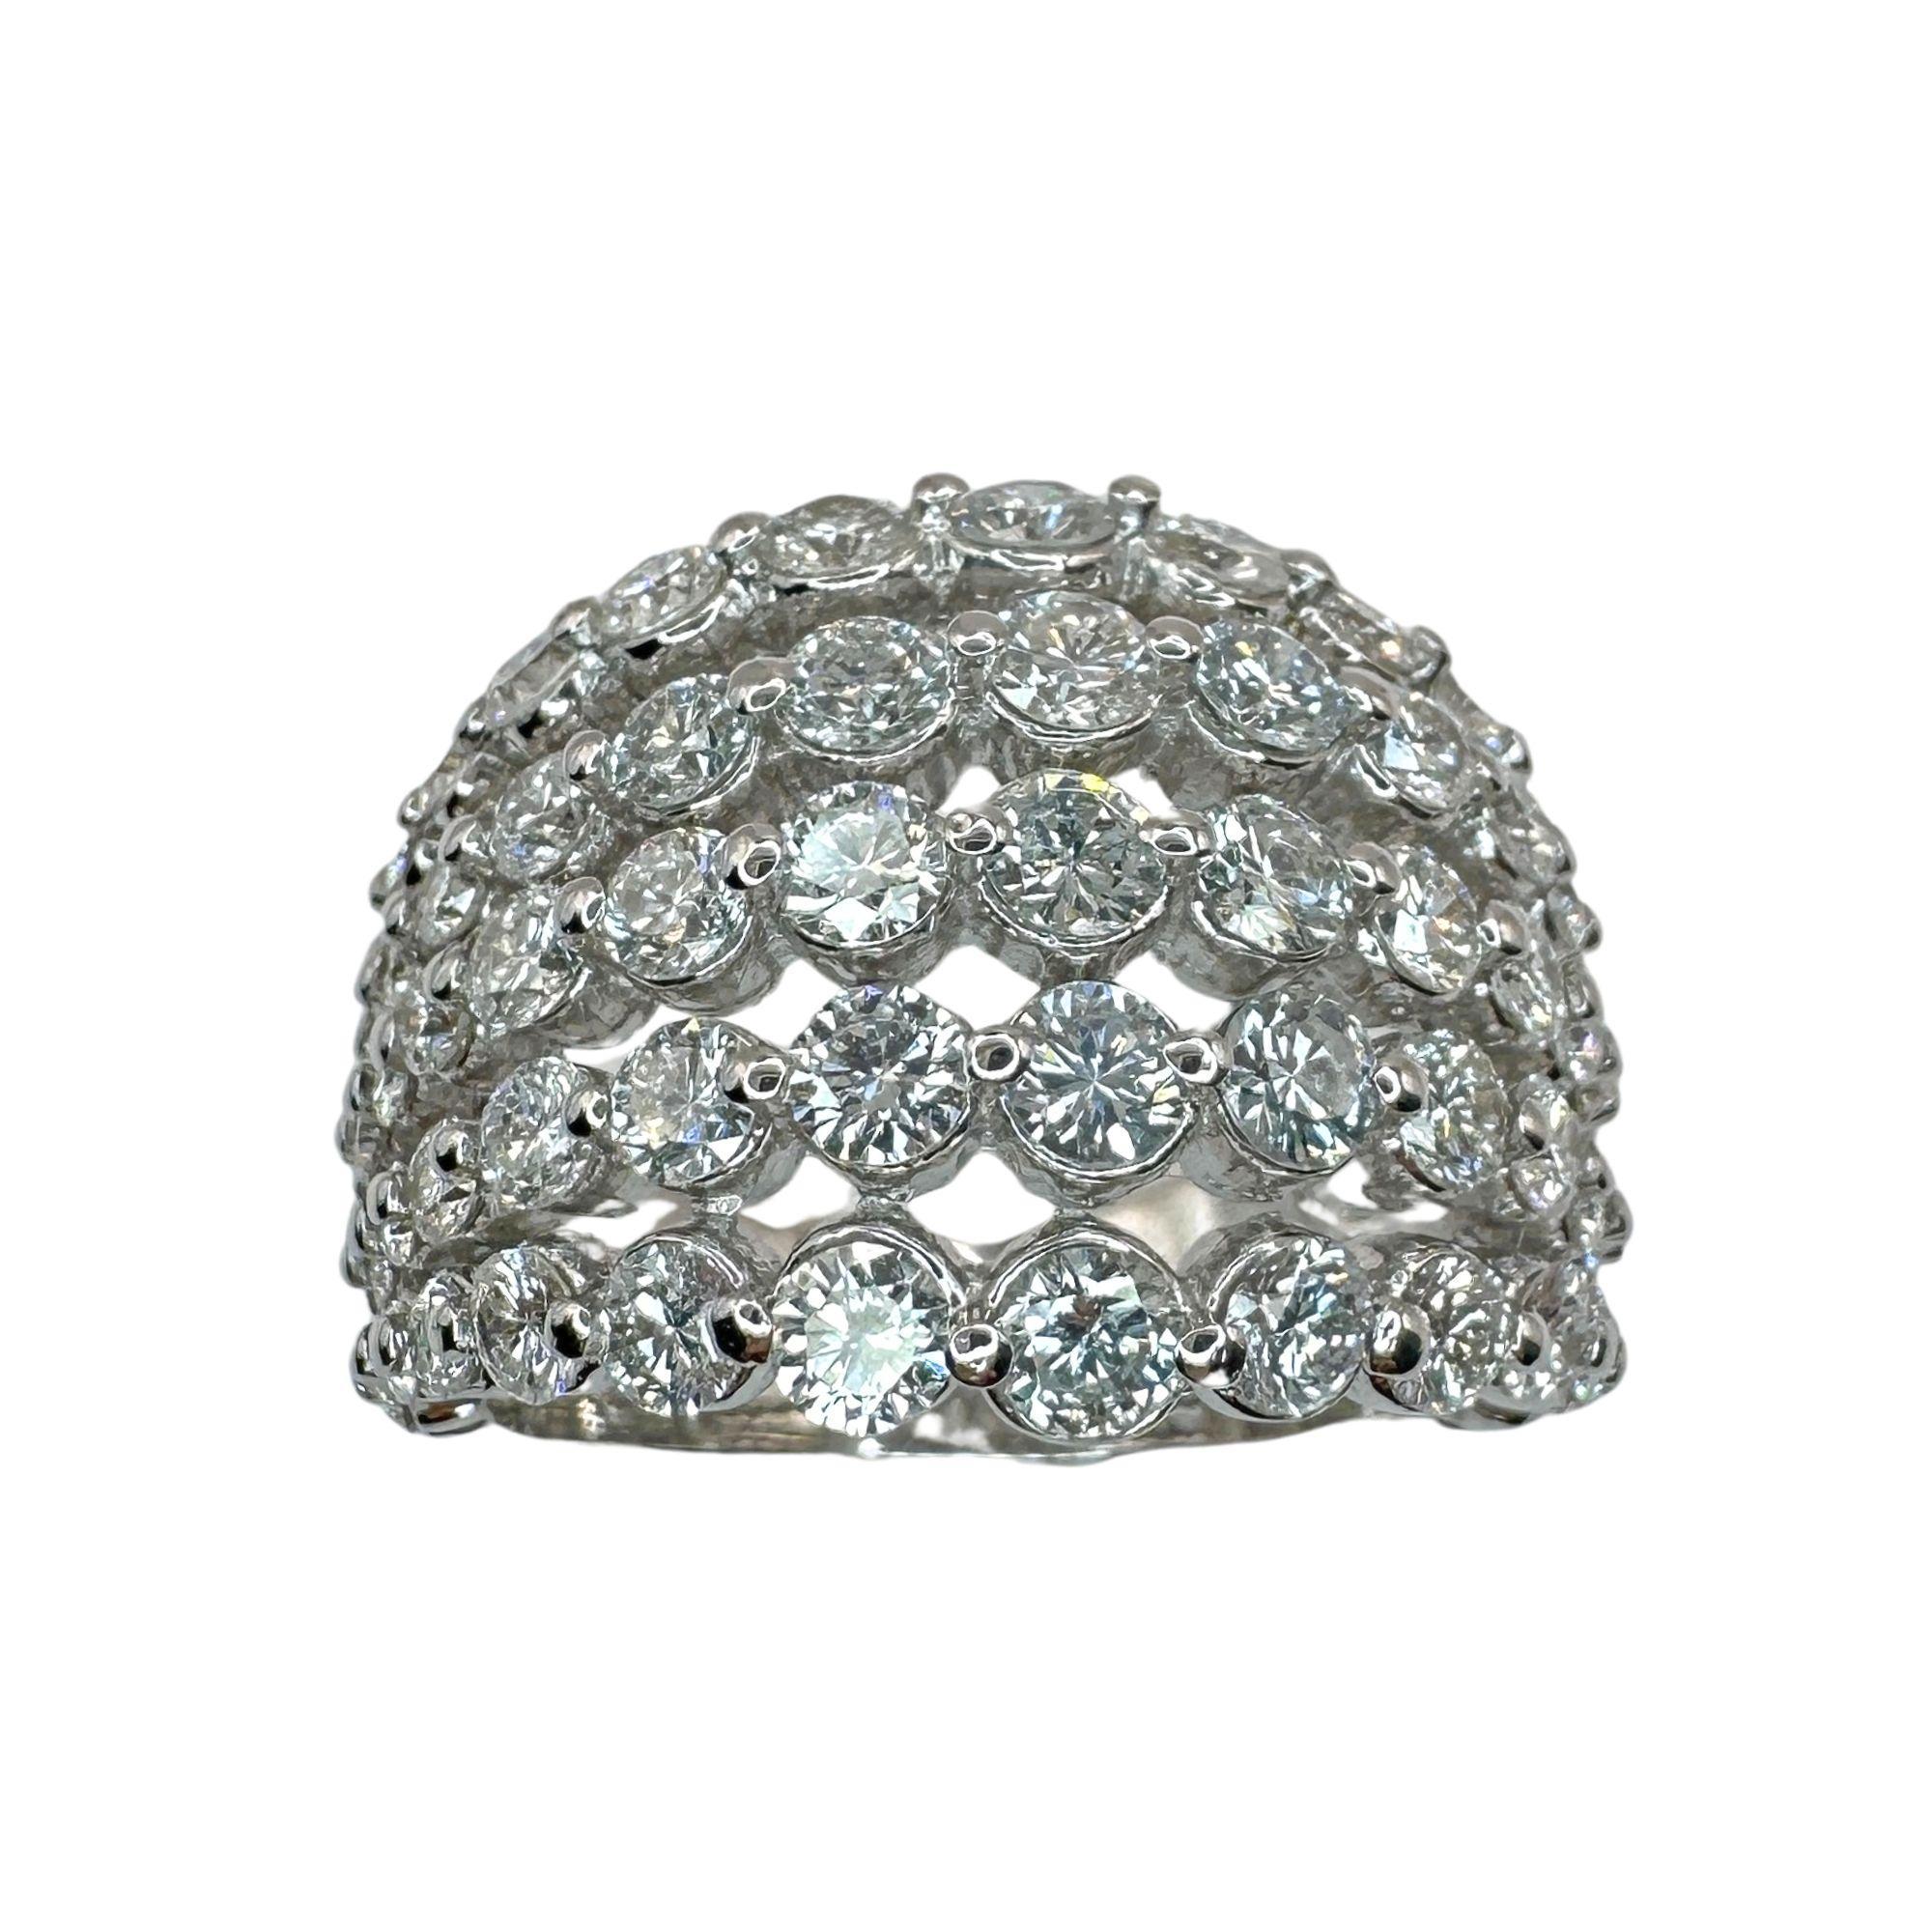 Indulge in luxury with our 18k Diamond Wide Band Ring. Crafted from 18k white gold and adorned with 2.57 carats of sparkling diamonds, this ring exudes elegance and sophistication. In excellent condition with a weight of 9.71 grams, it is marked